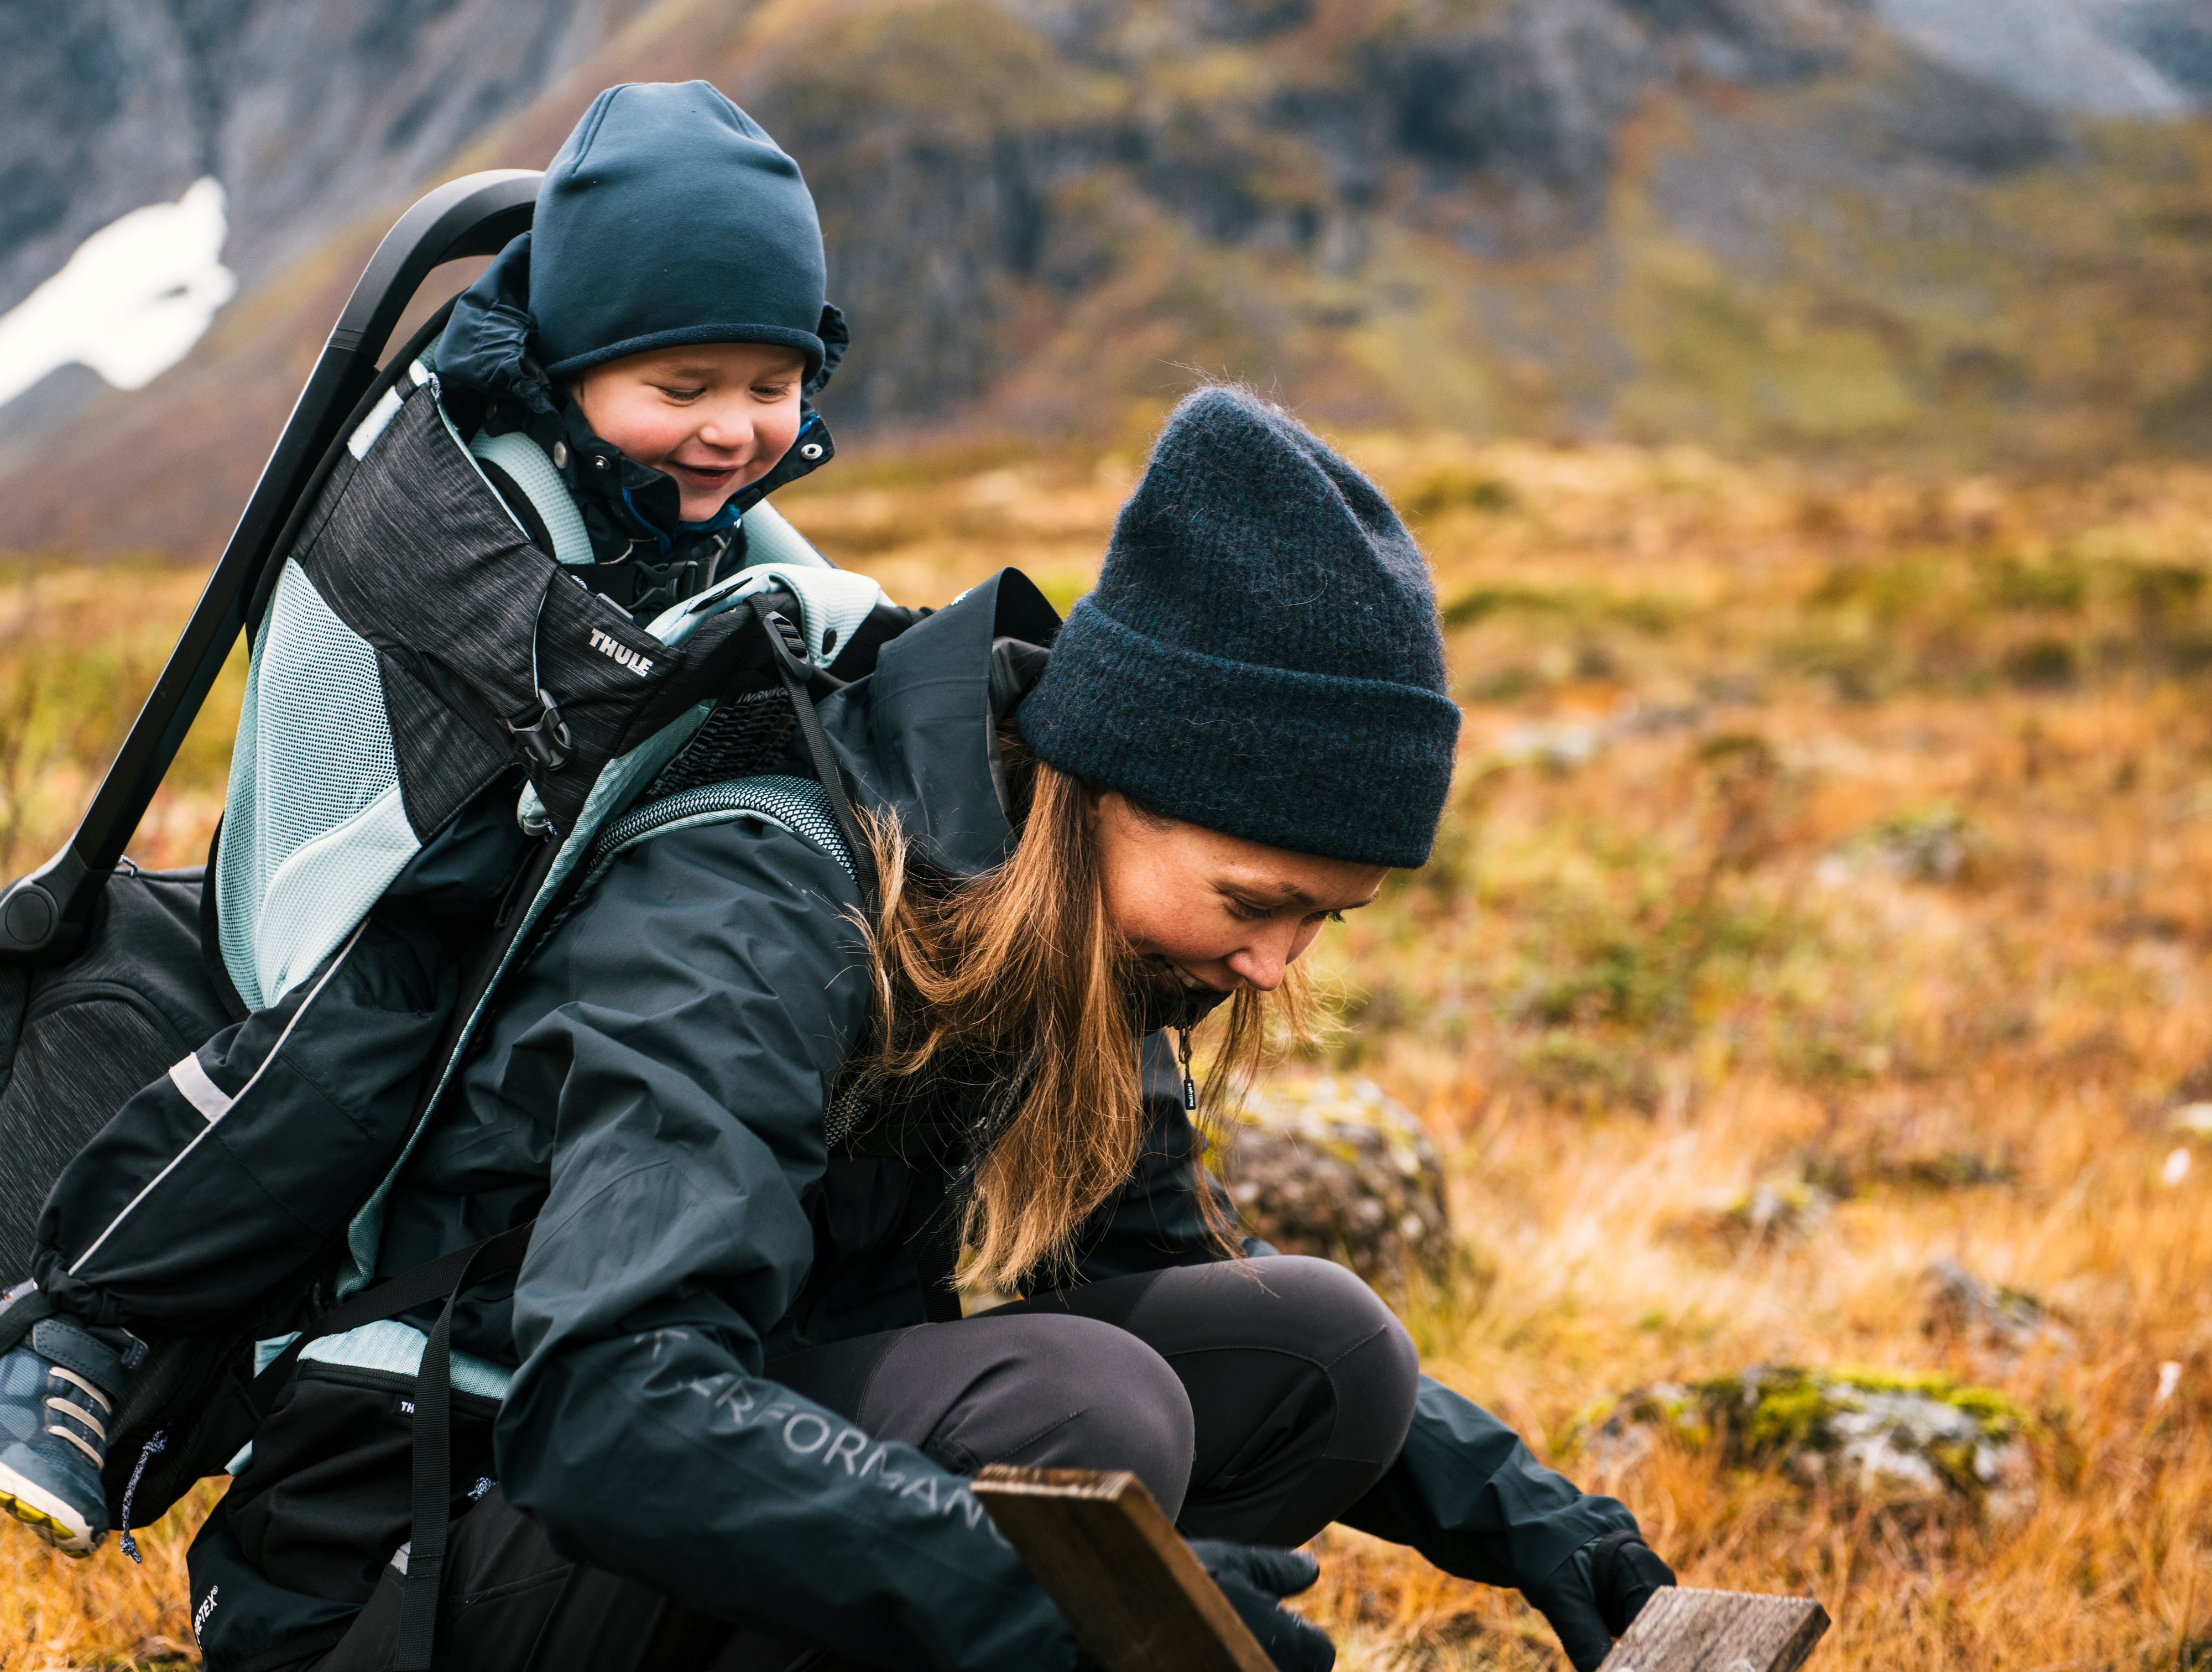 mum and child on outdoor adventure playing with child sitting in Thule Child Carrier Backpack Sapling